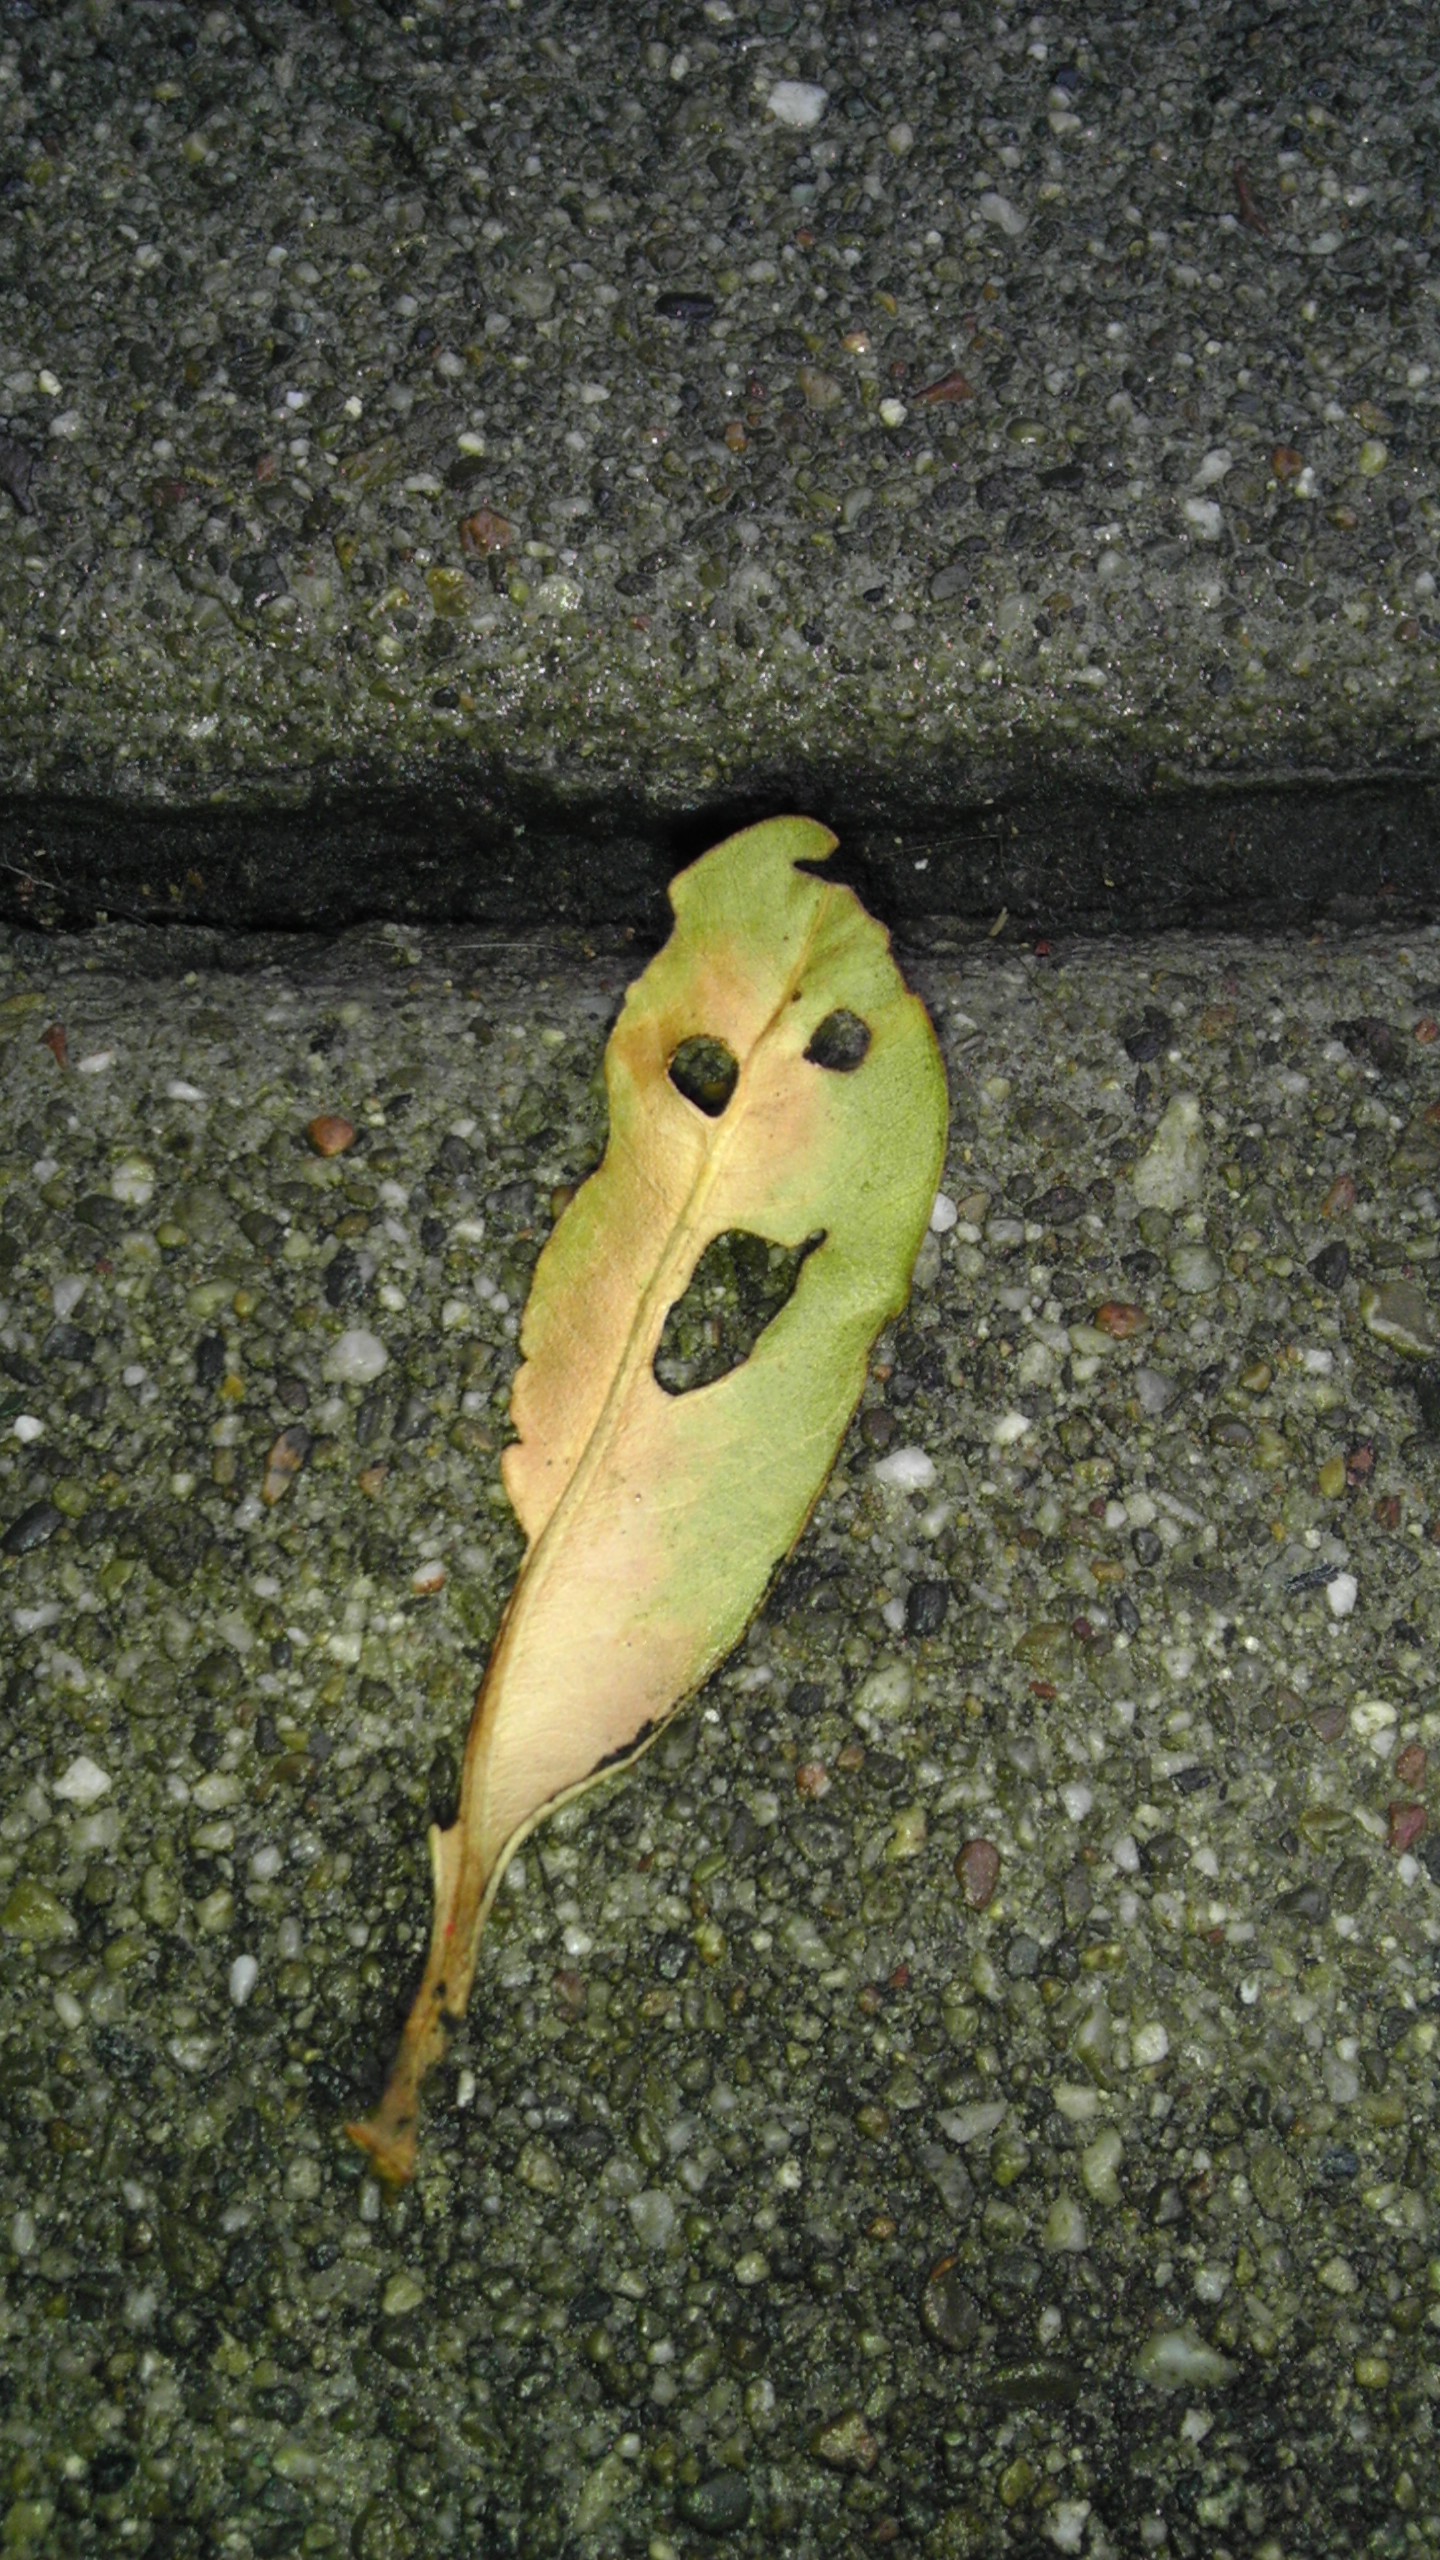 Happy leaf smiled at me on the way to work this morning!